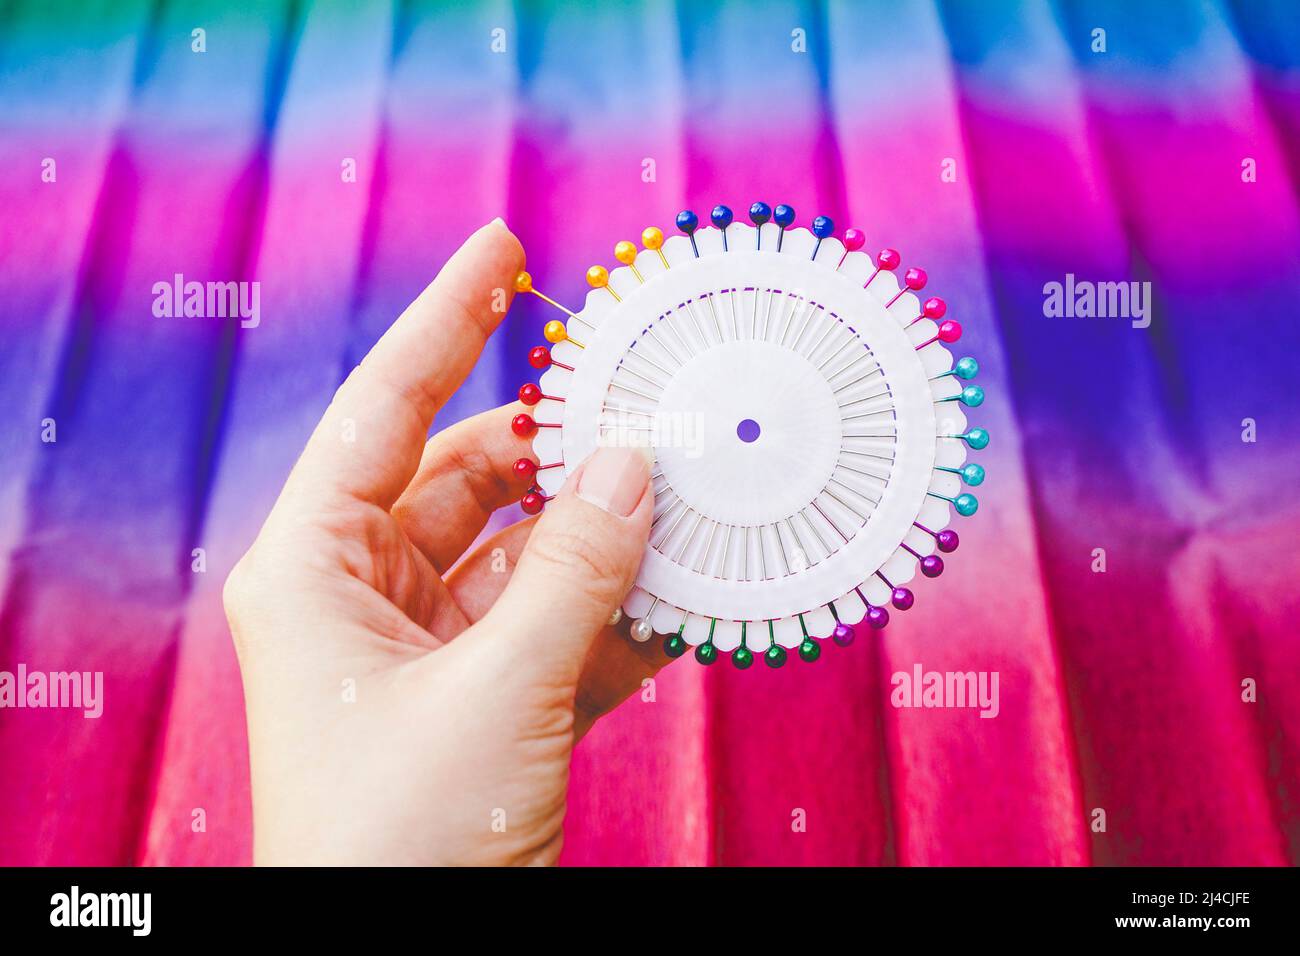 close up of a Rainbow and colorful circle made by pins Stock Photo